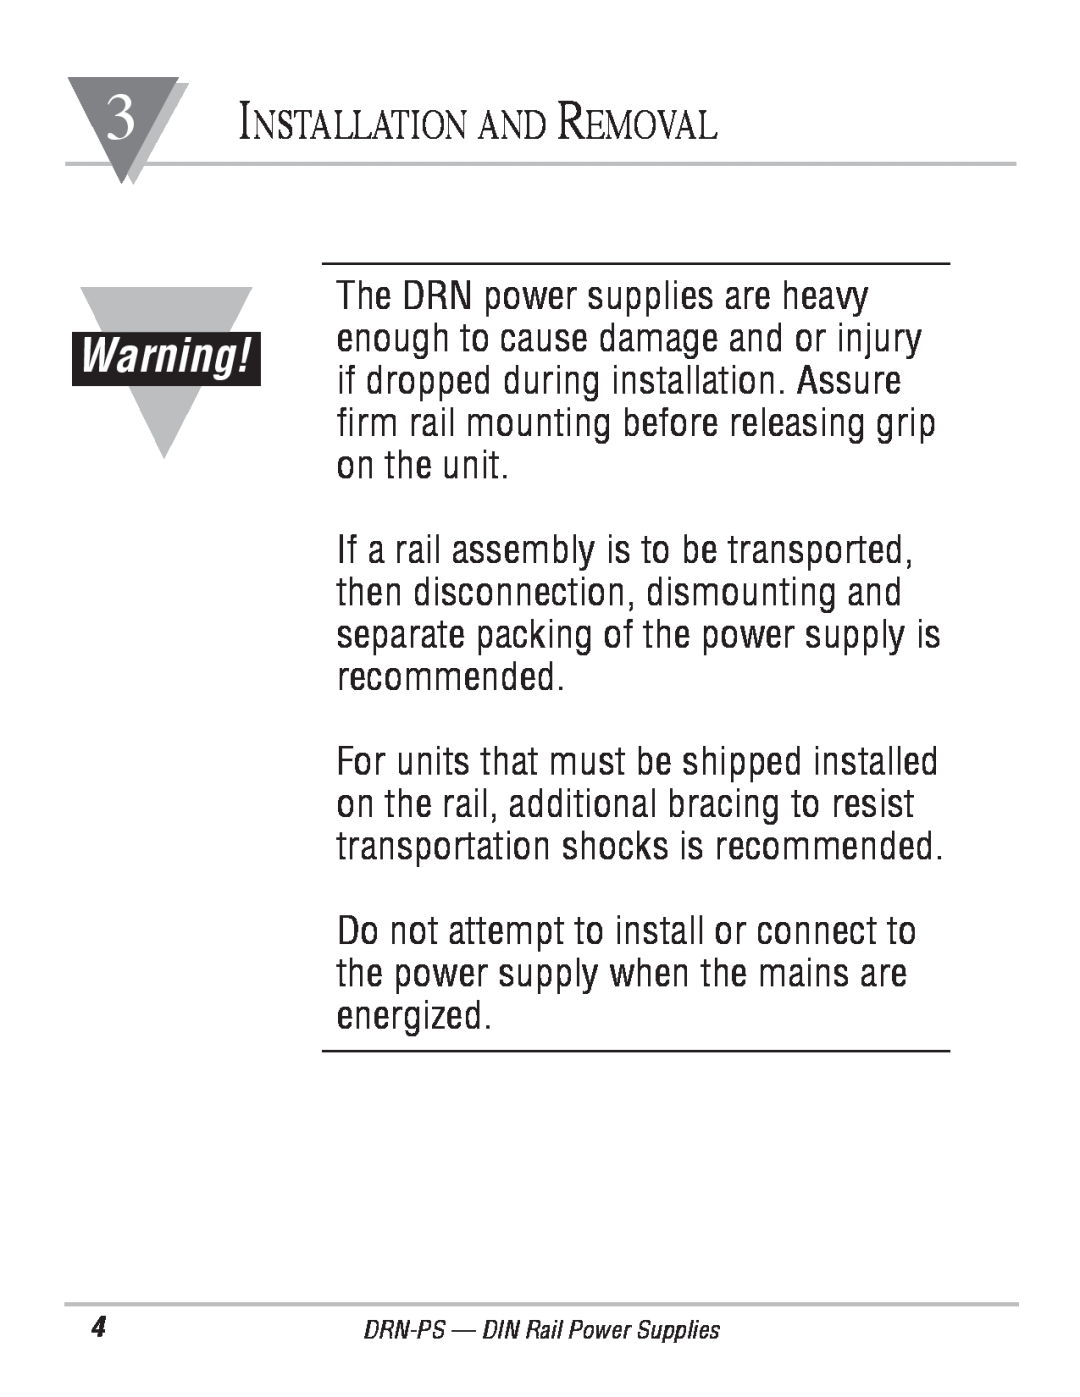 Omega Engineering DRN-PS-750 manual Installation And Removal, The DRN power supplies are heavy 